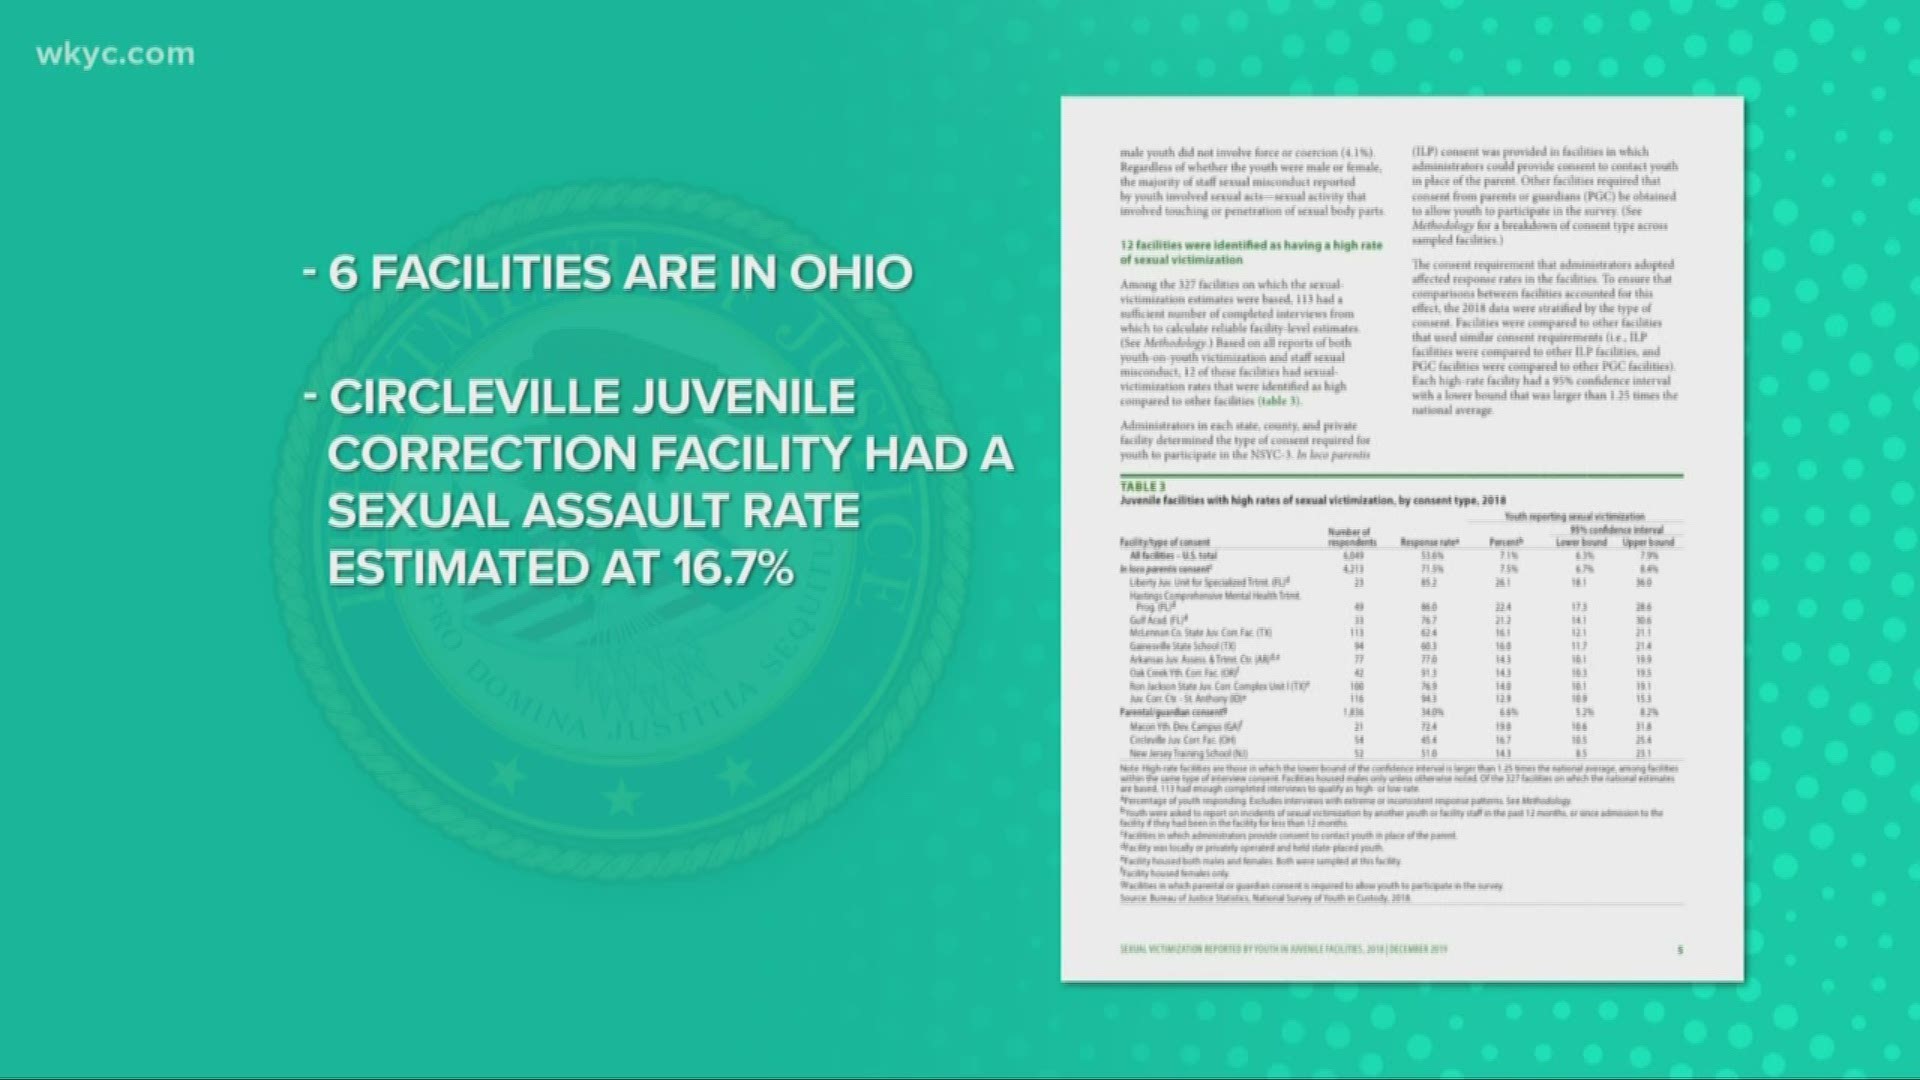 Ohio judges send kids to juvenile detention to rehabilitate them – but many youth say they've been sexually victimized while in the state's custody.